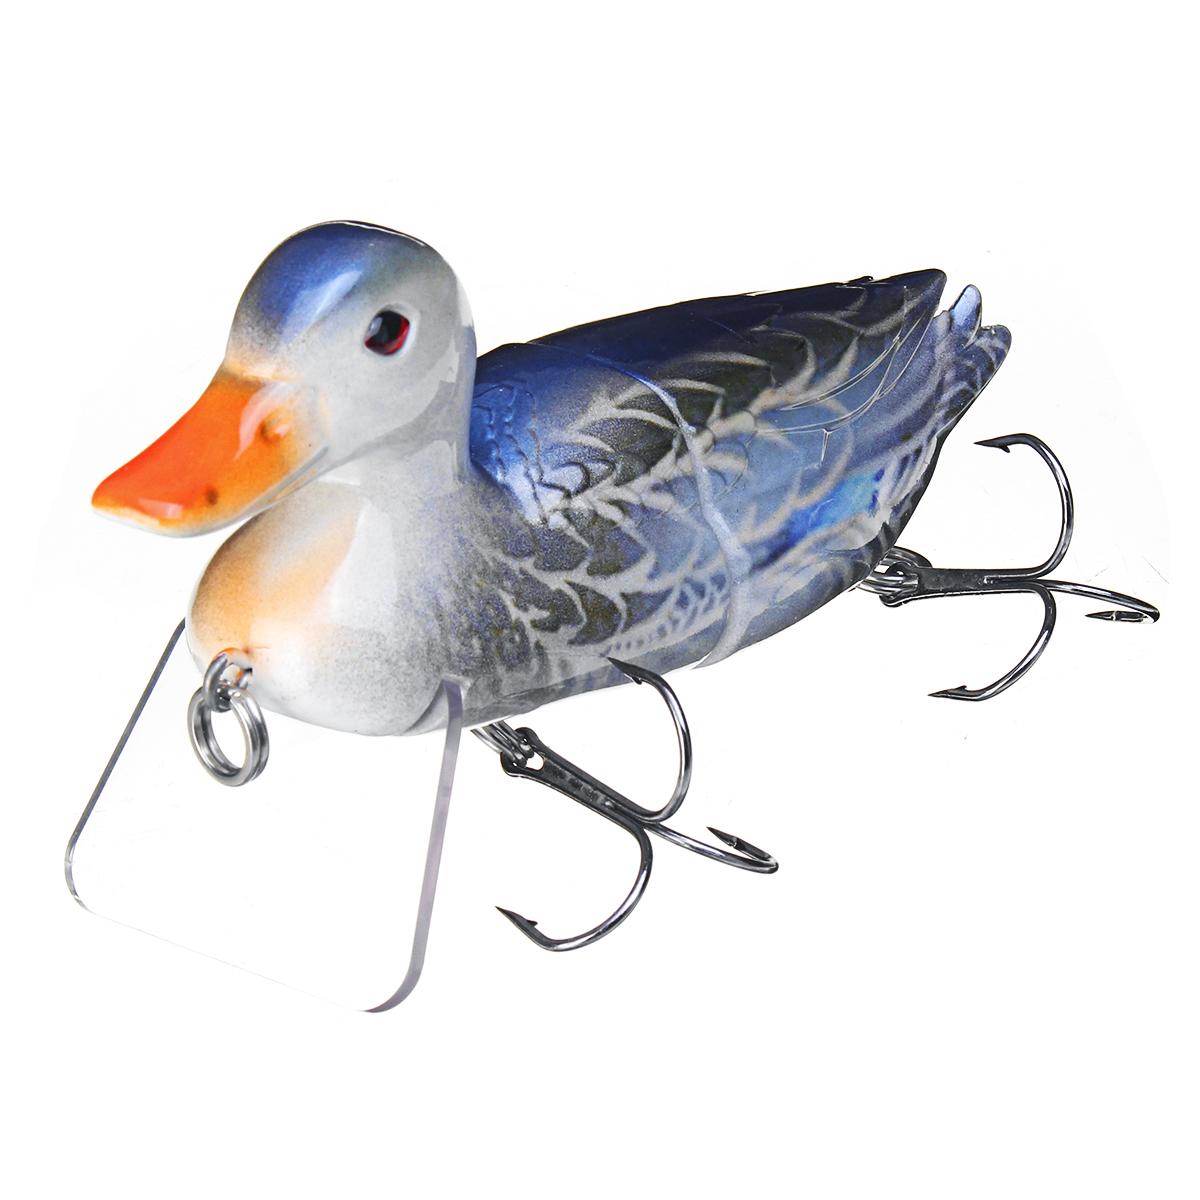 ZANLURE-1PC-15CM-90g-Floating-Duck-Shape-Fishing-Lure-With-Hook-Topwater-Soft-Bait-Fishing-Tackle-1648972-10